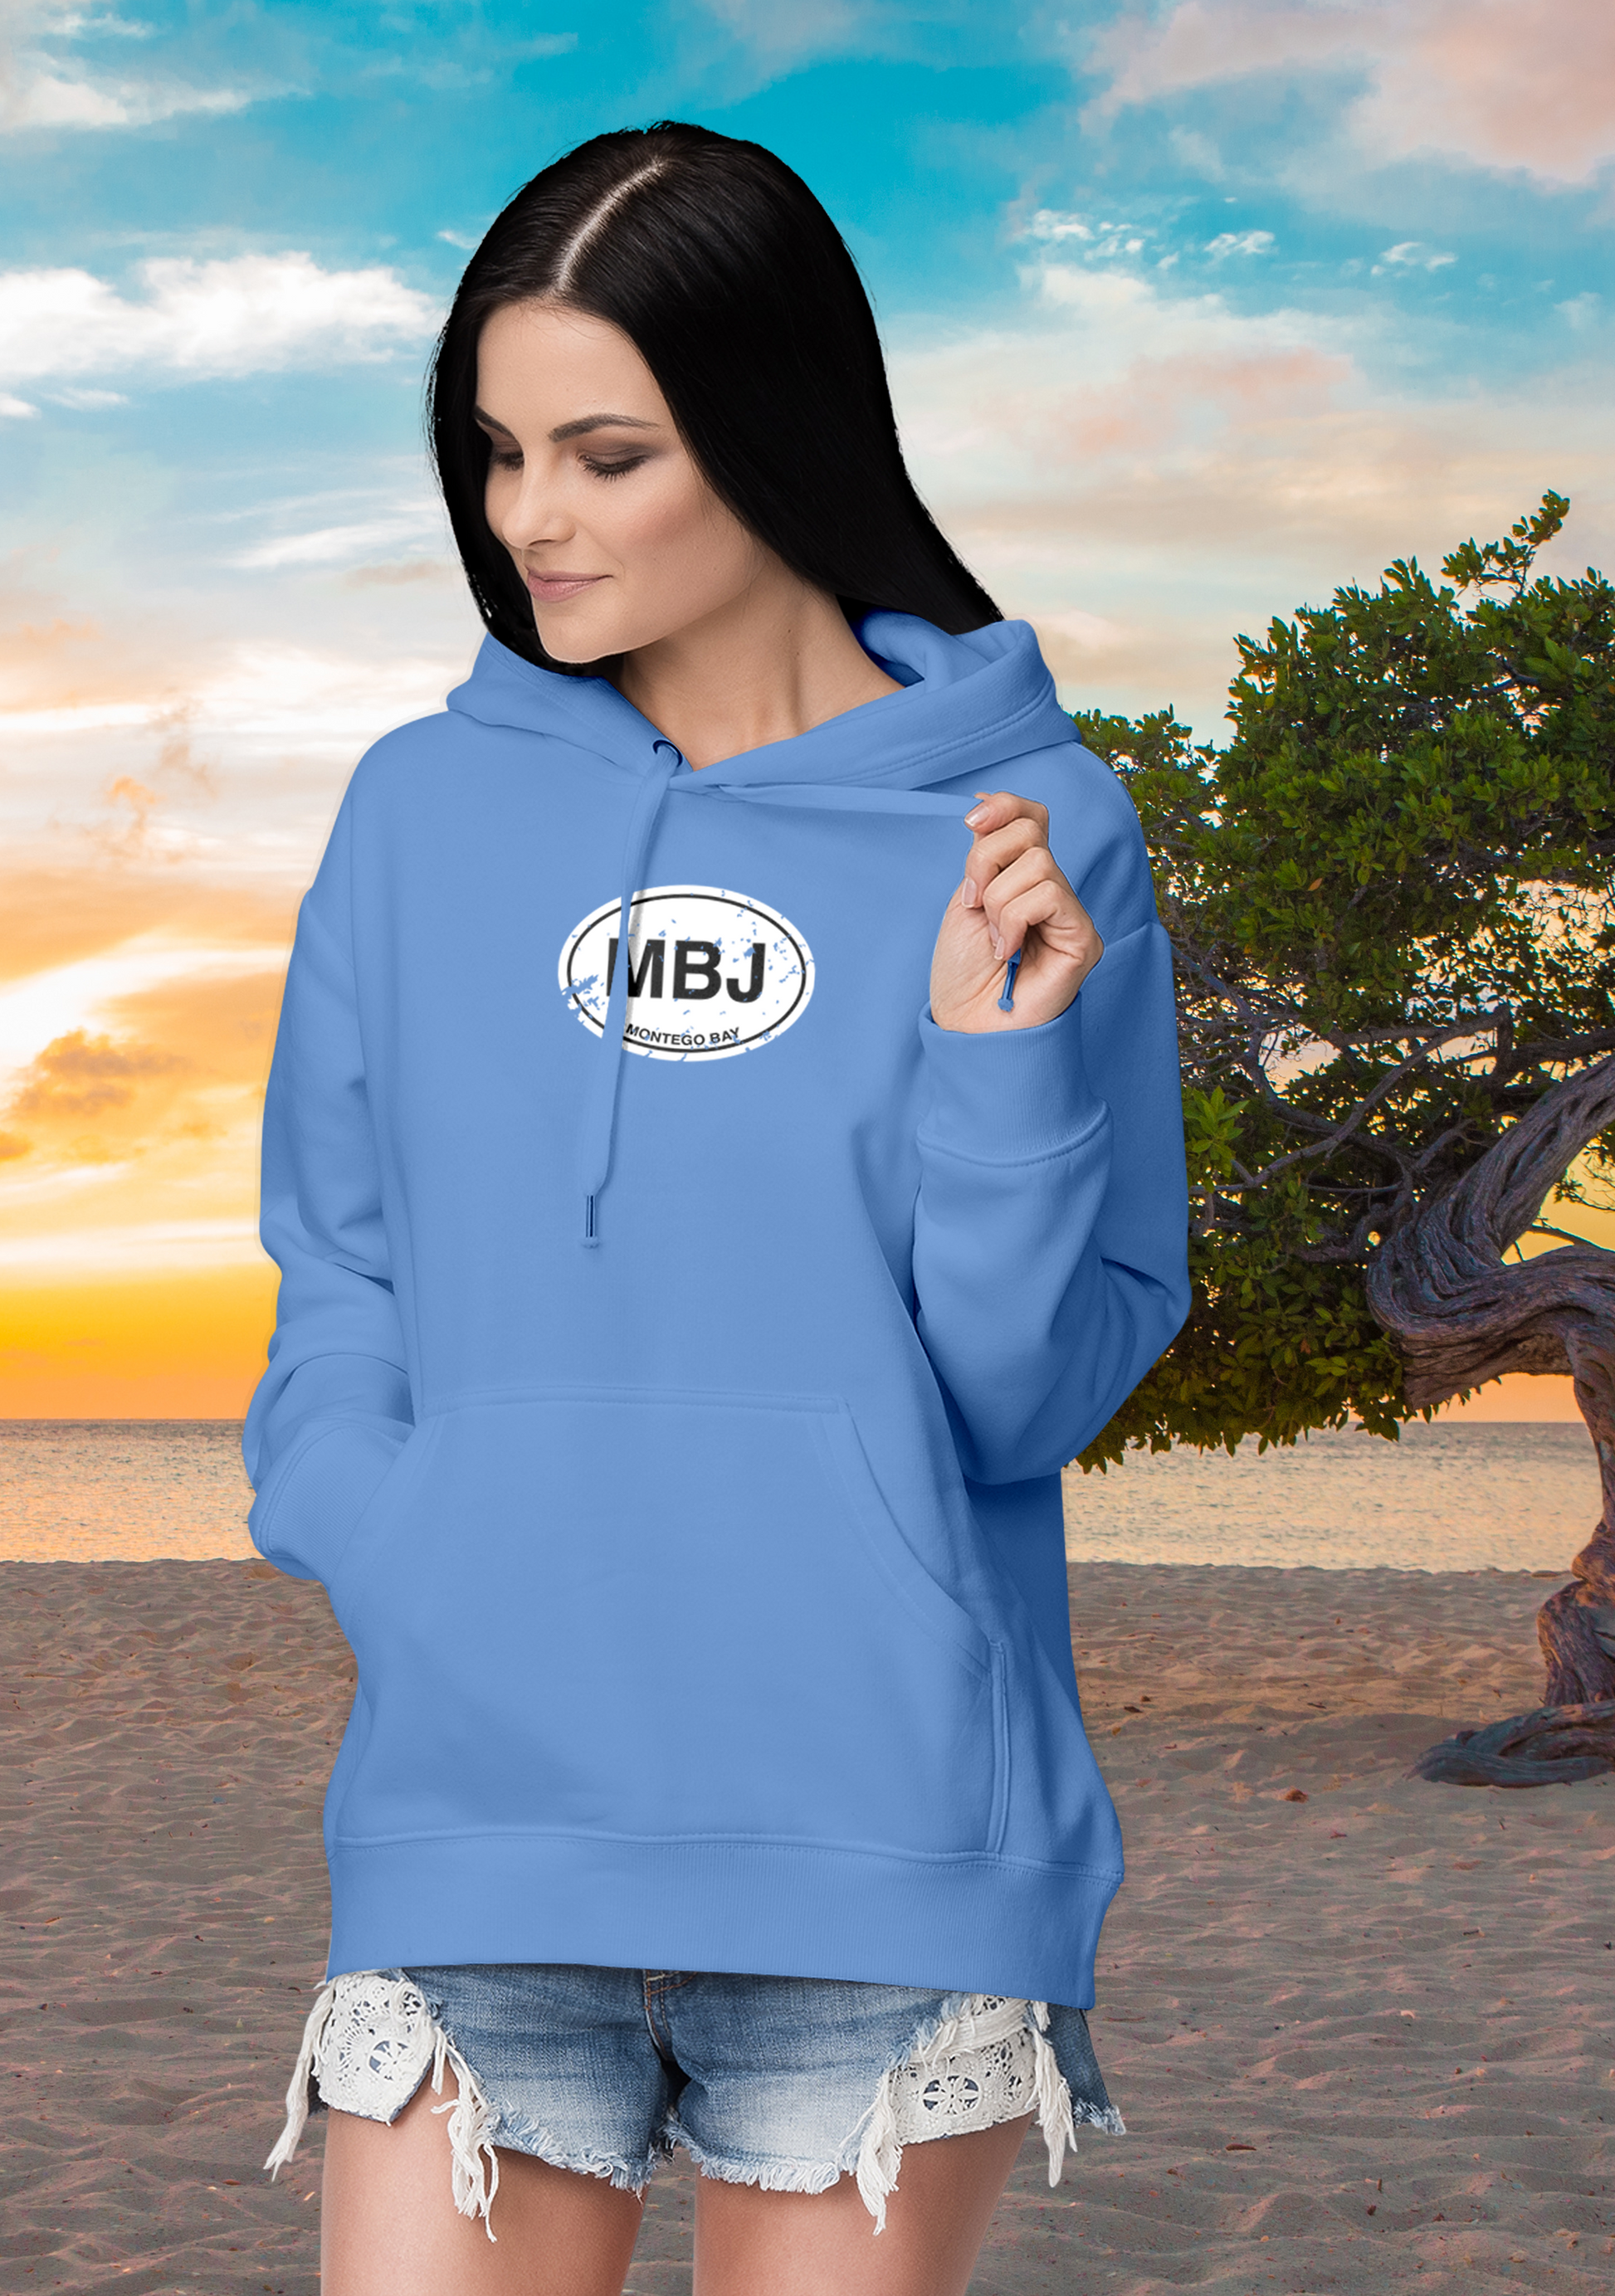 Montego Bay Men's and Women's Classic Adult Hoodie - My Destination Location